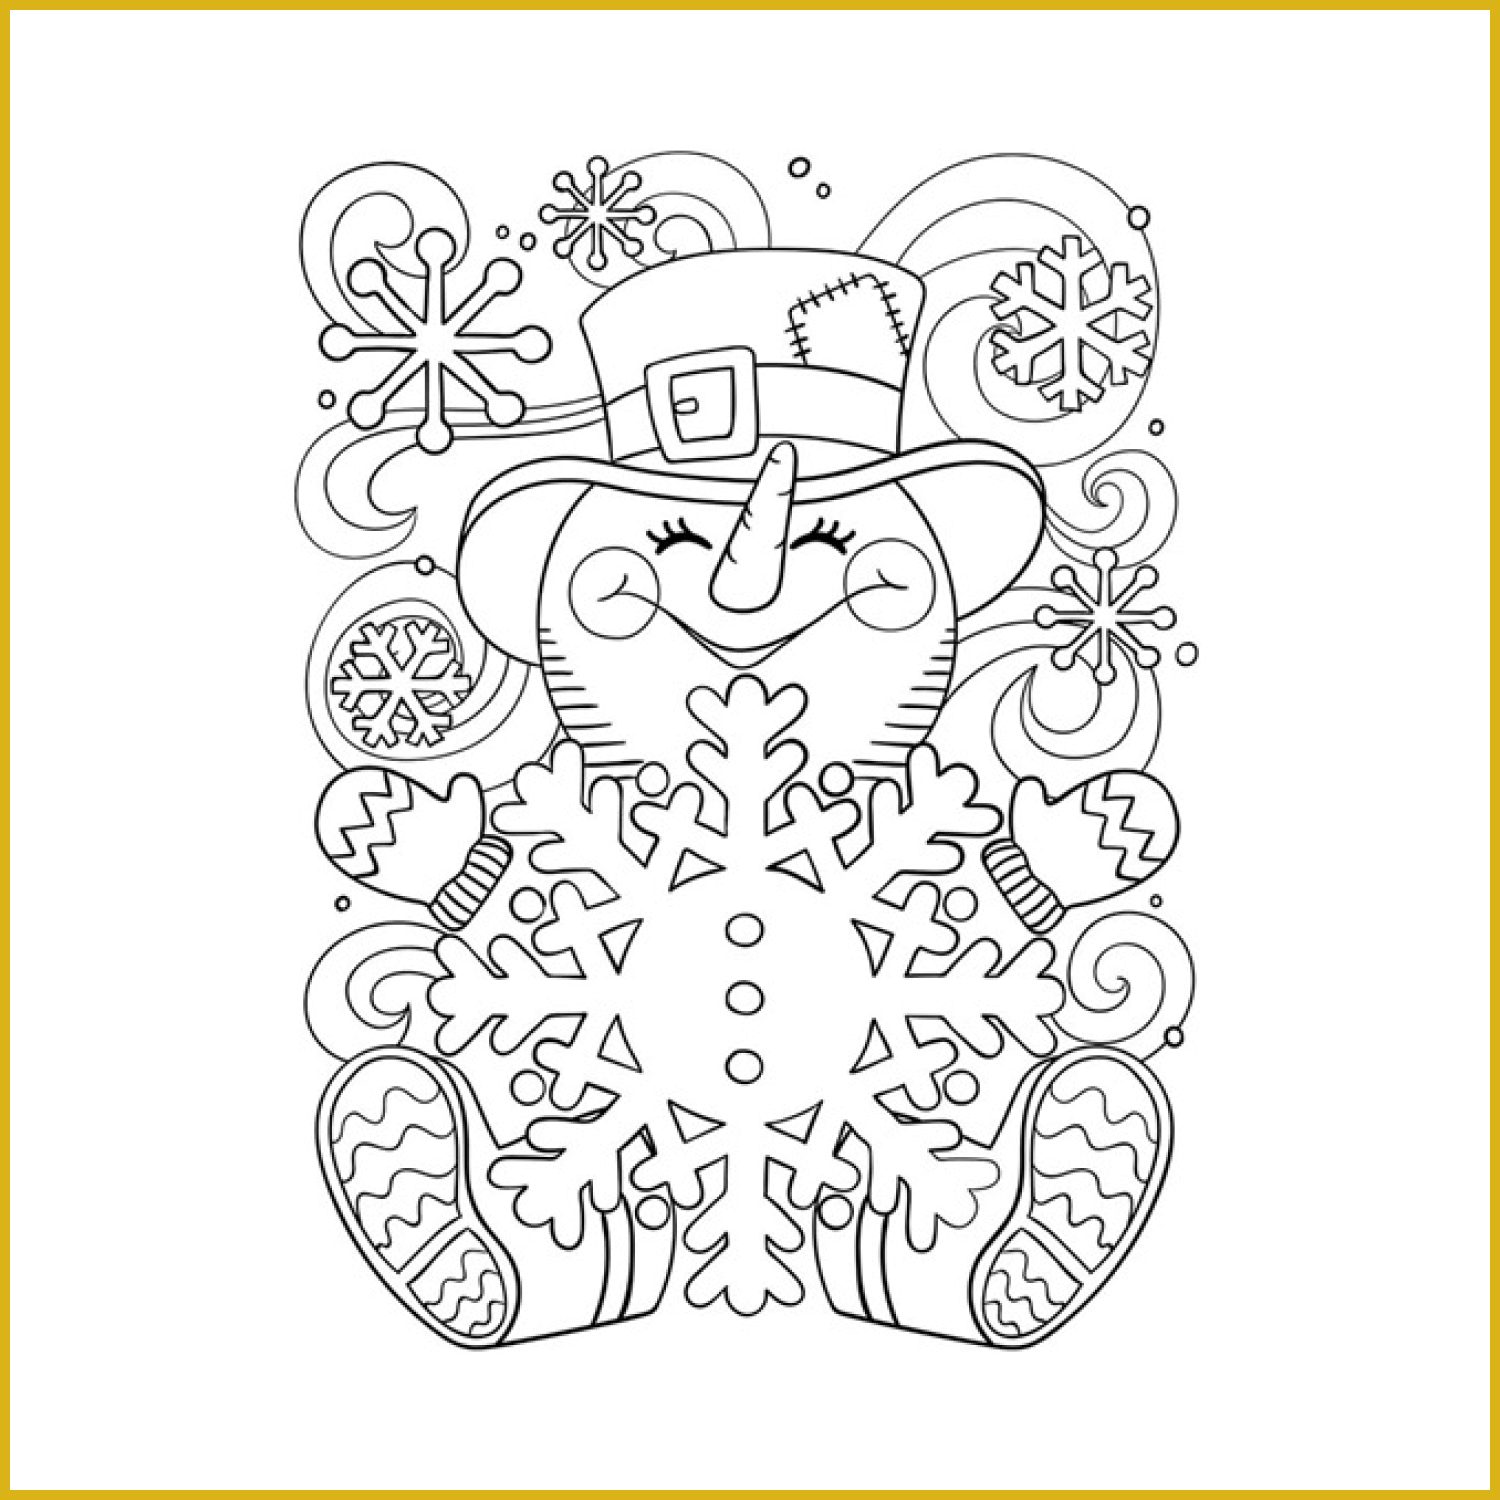 Happy little snowman coloring page cover image.